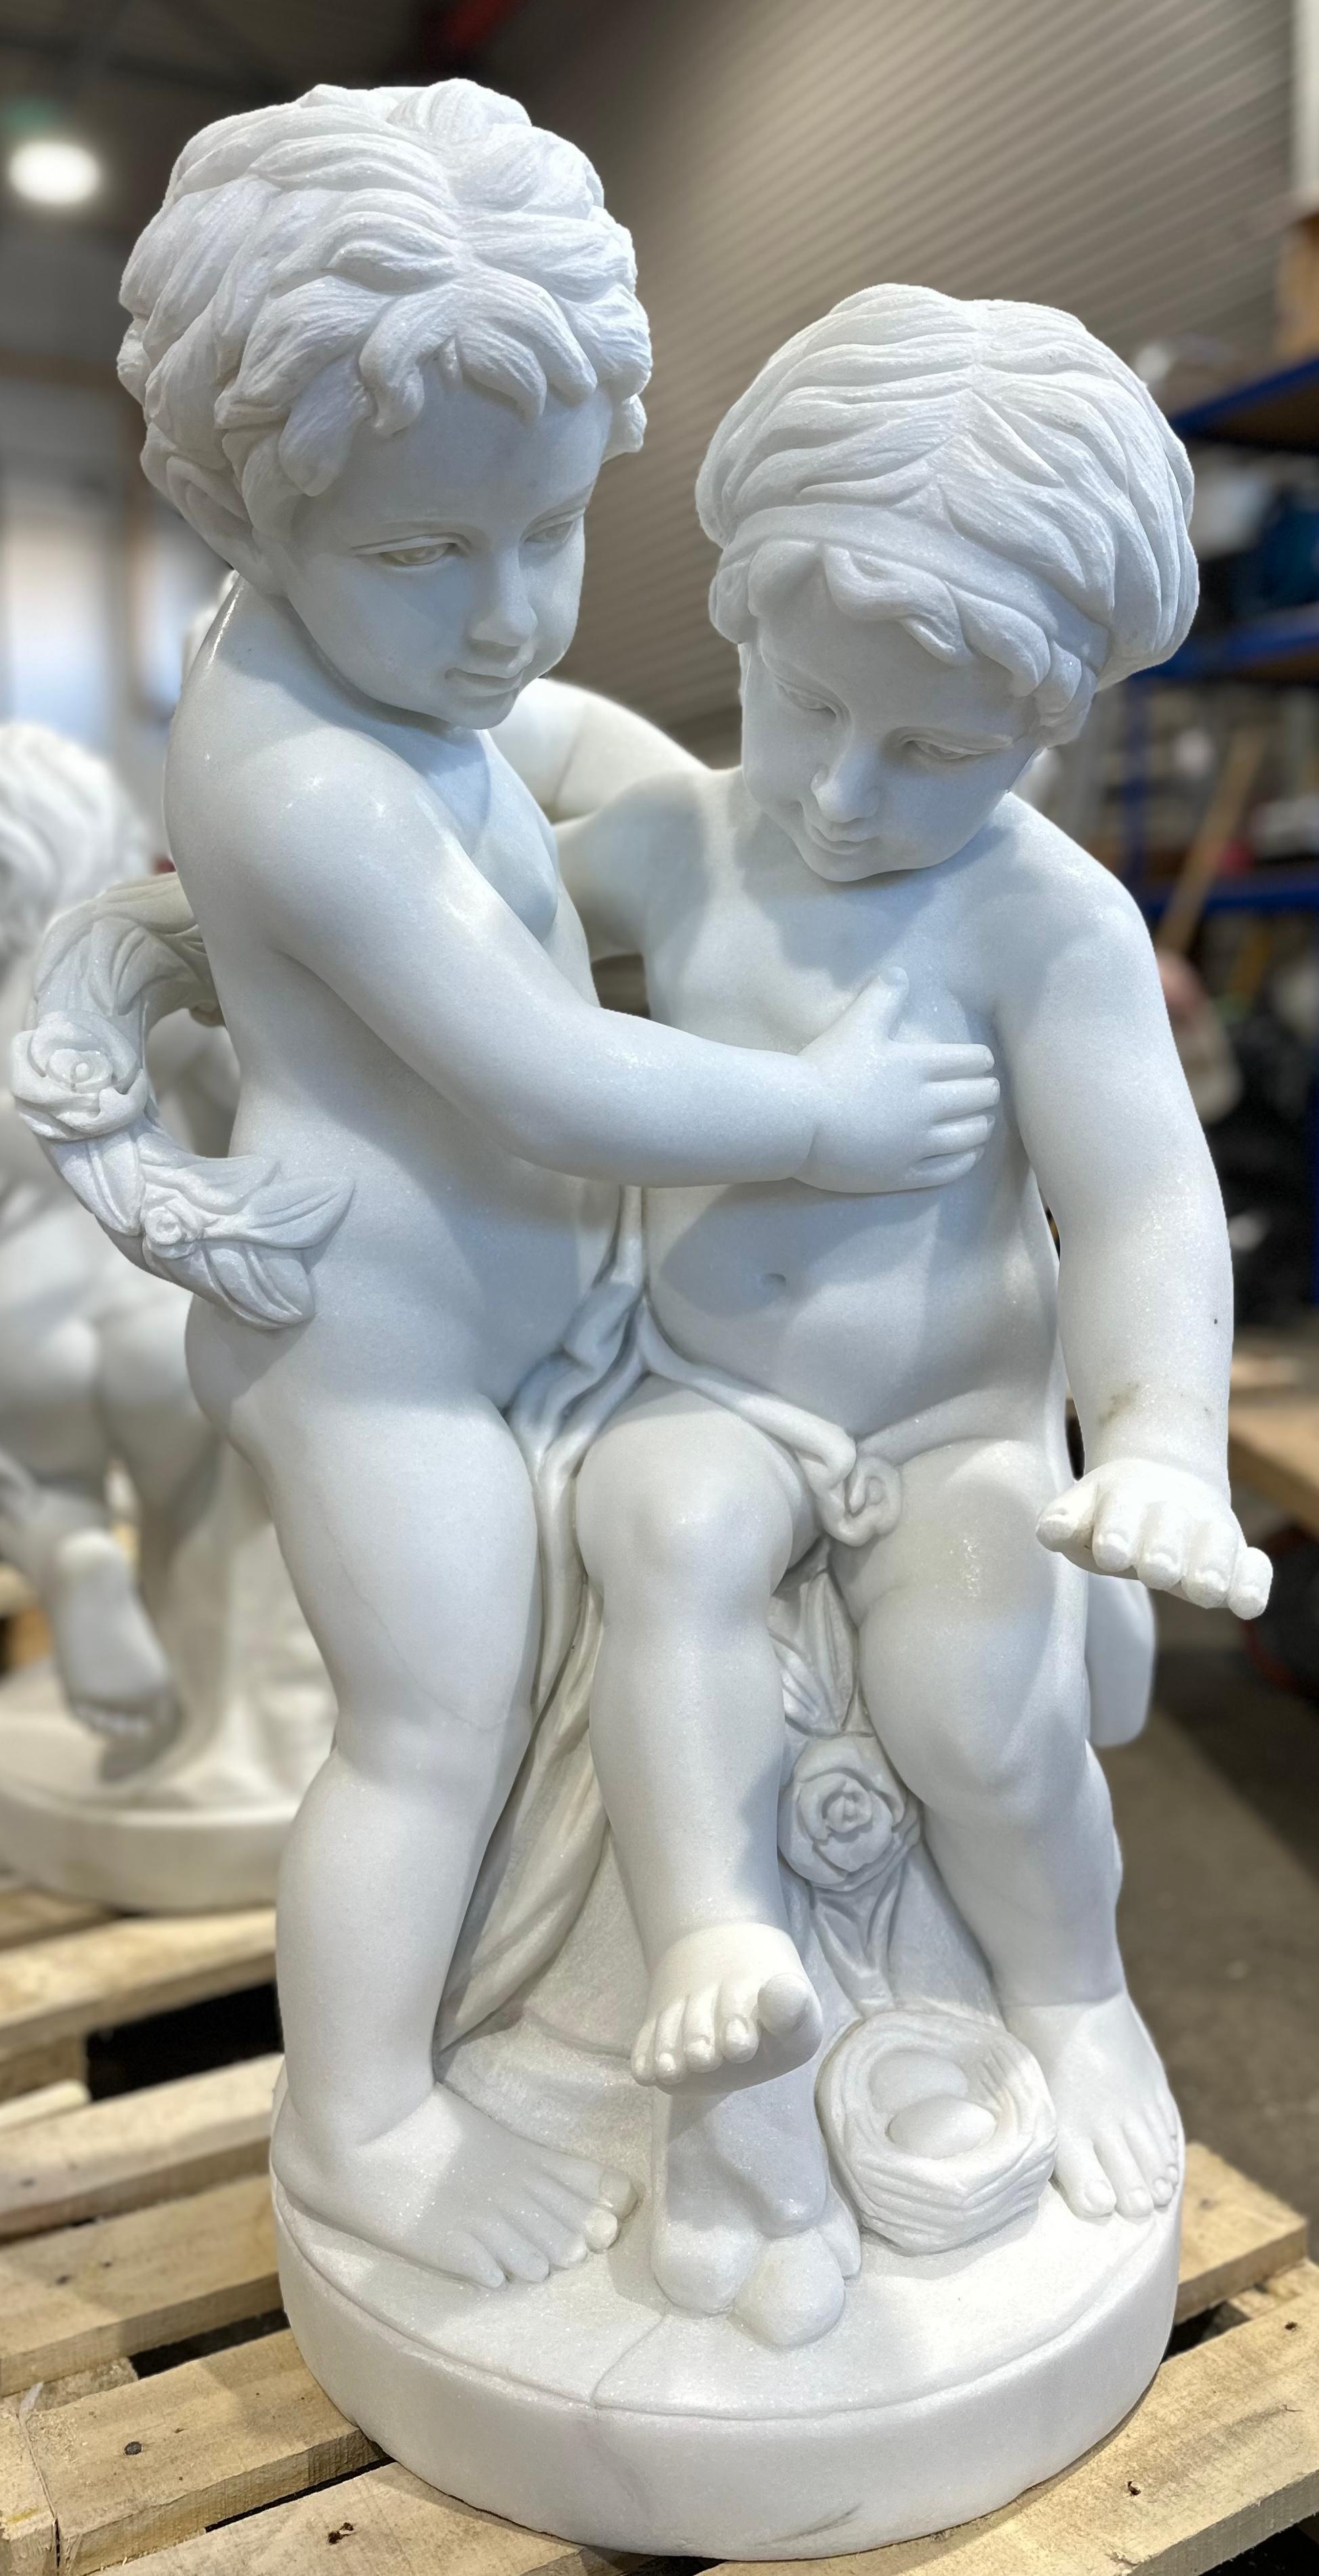 A enchanting white marble sculpture of two childlike putti, one standing the other seated, with a floral wreath wrapped around them. And a birds nest with two eggs at their feet. 
The carving is well done and detailed from the ruffled hair of the